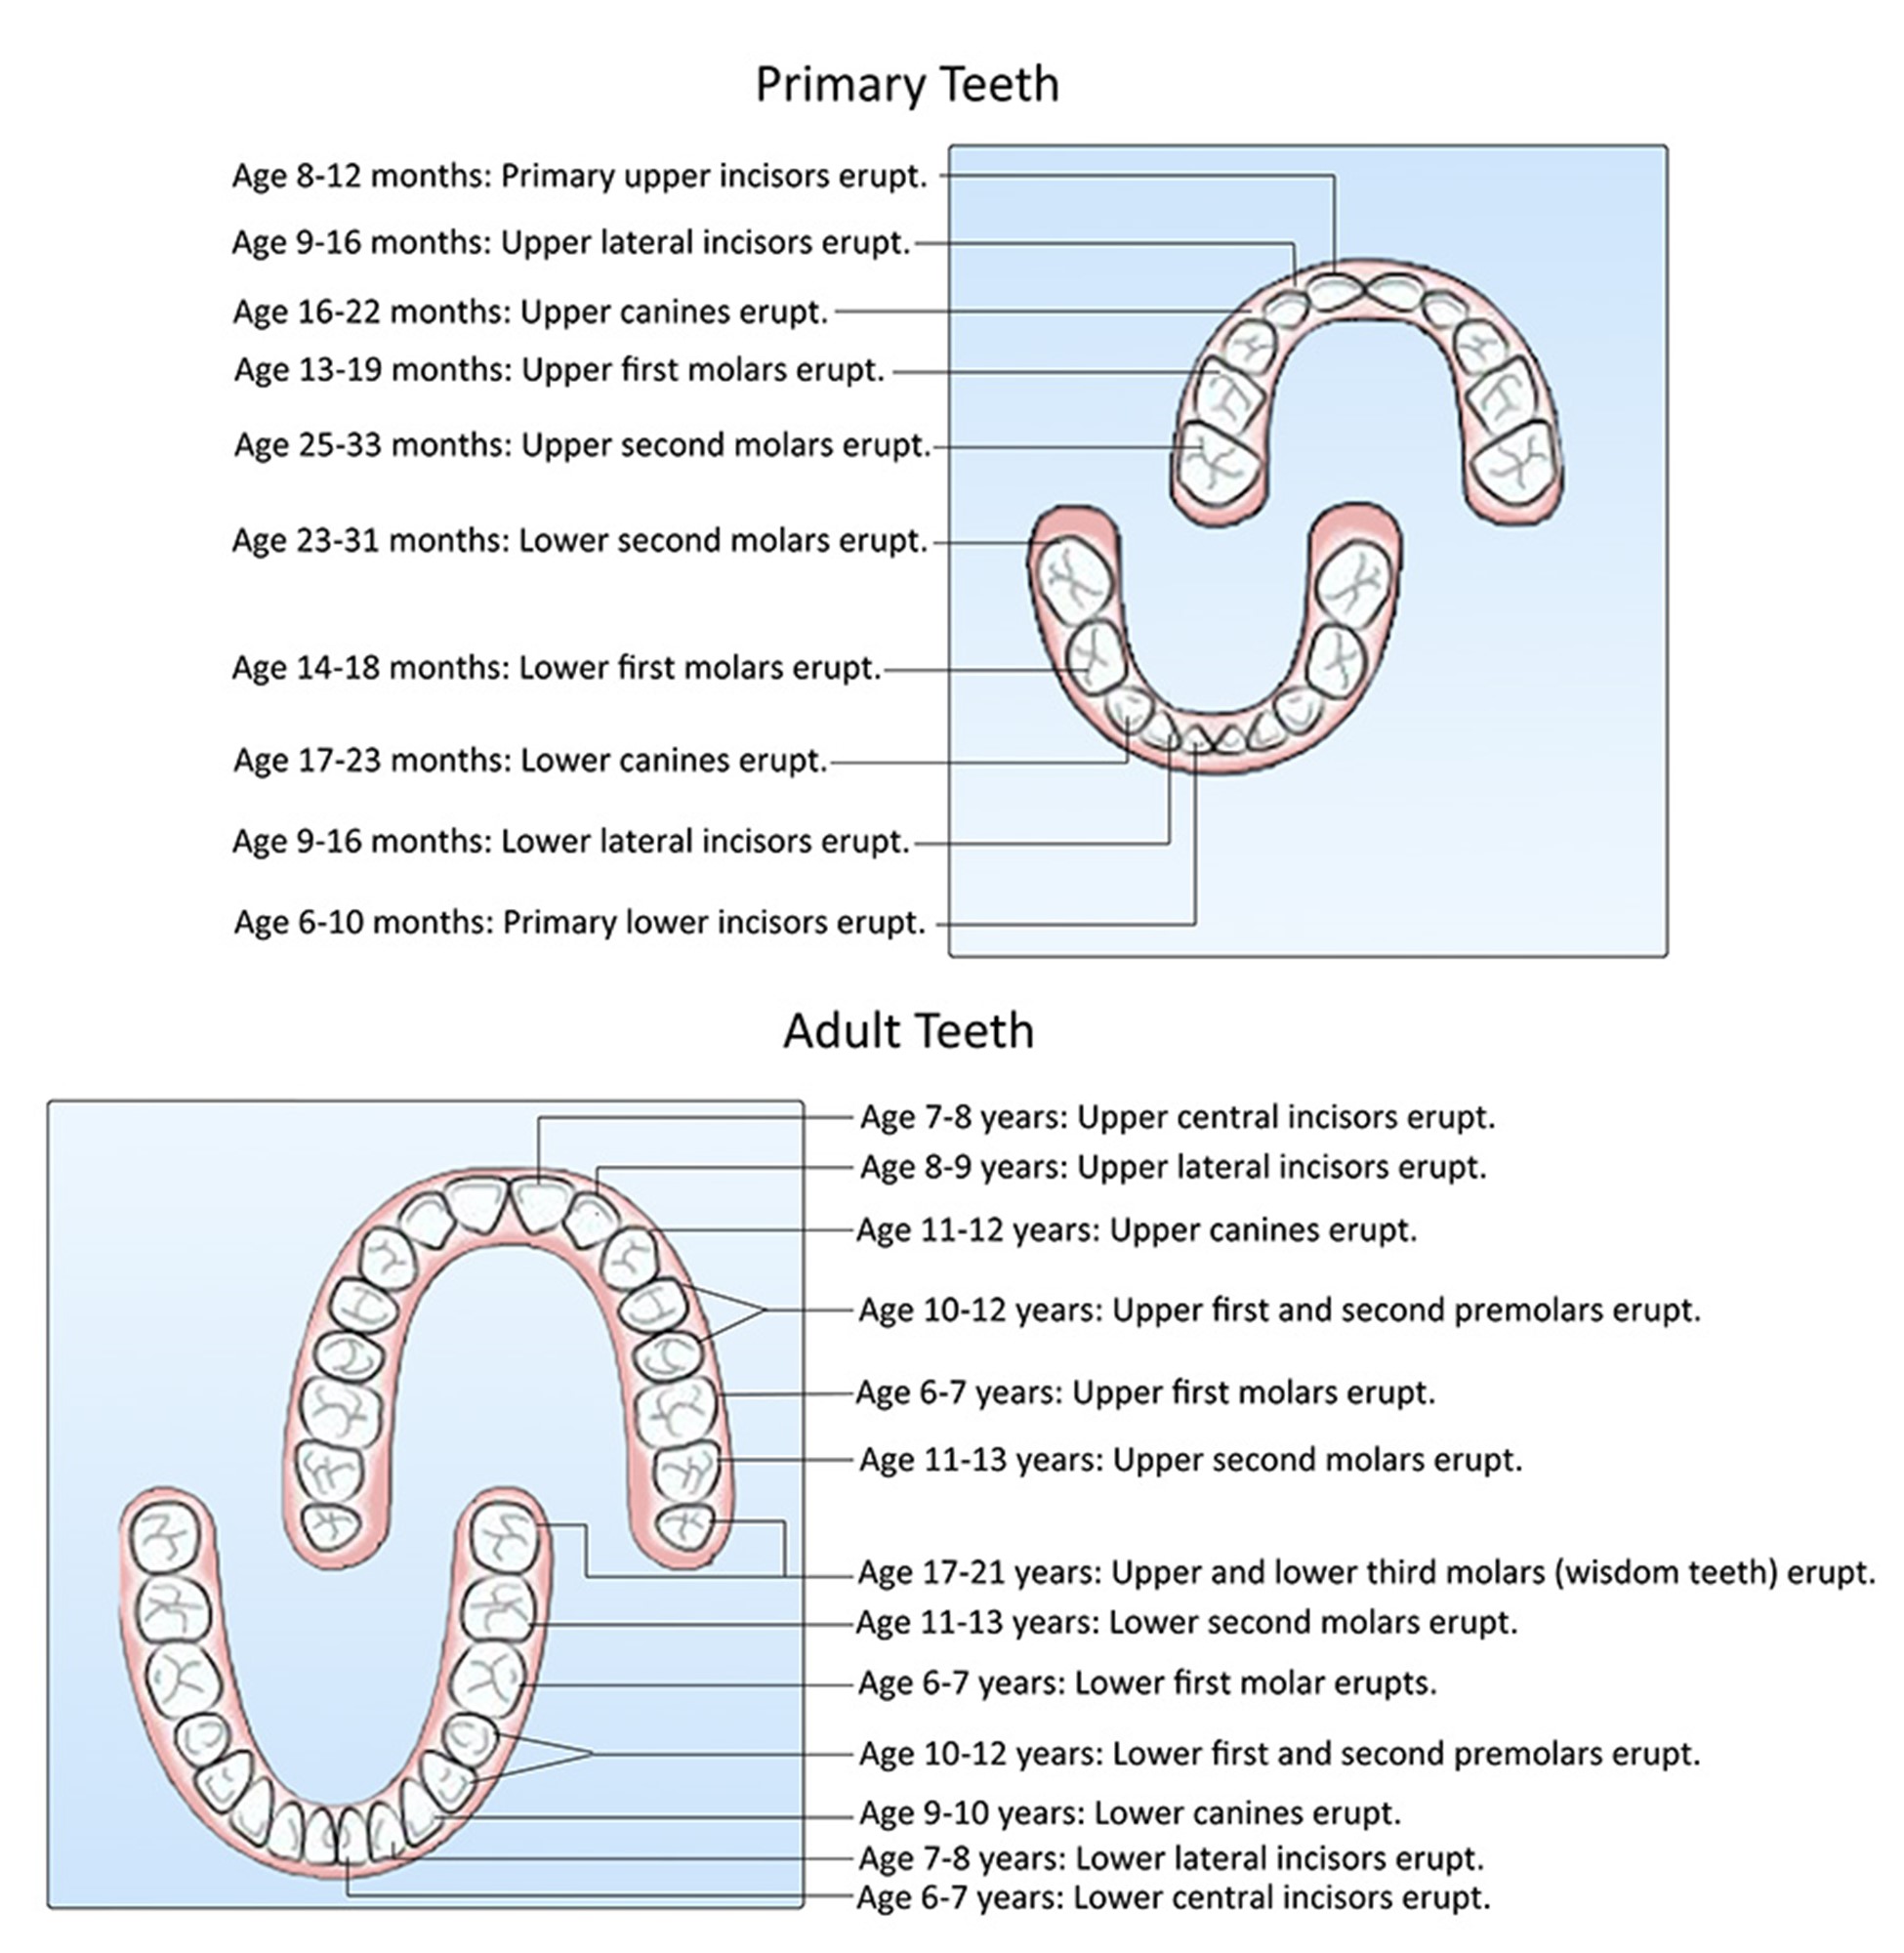 Age month. Вопросы про зубы. Primary Teeth. The first Teeth erupt between 6 to 9 months.